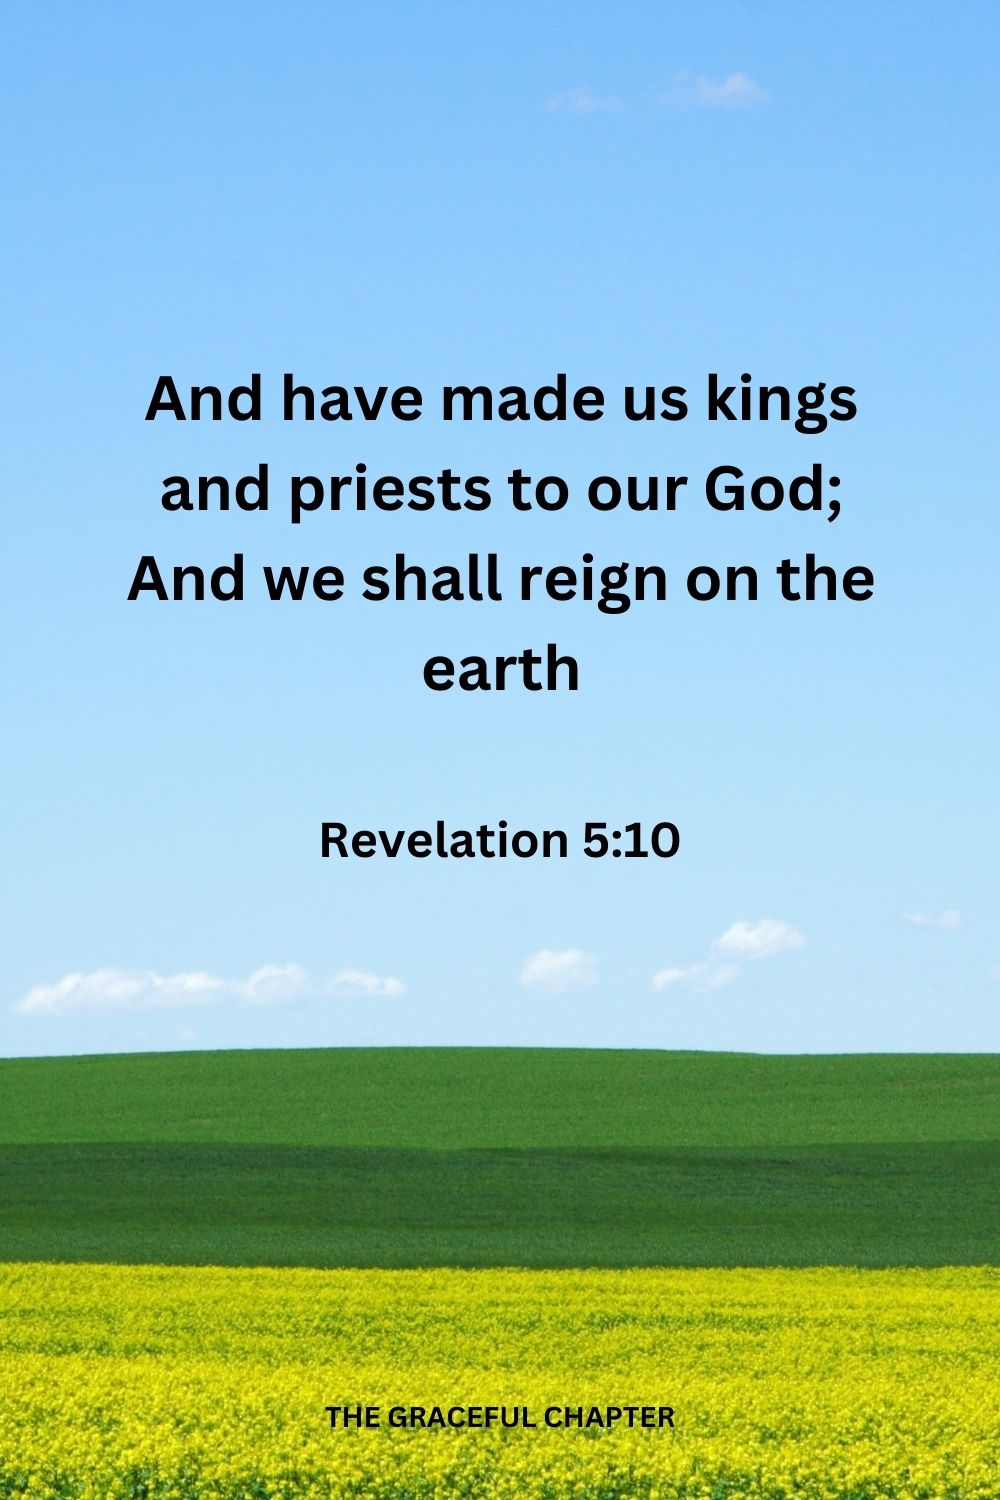 And have made us kings and priests to our God; And we shall reign on the earth. Revelation 5:10